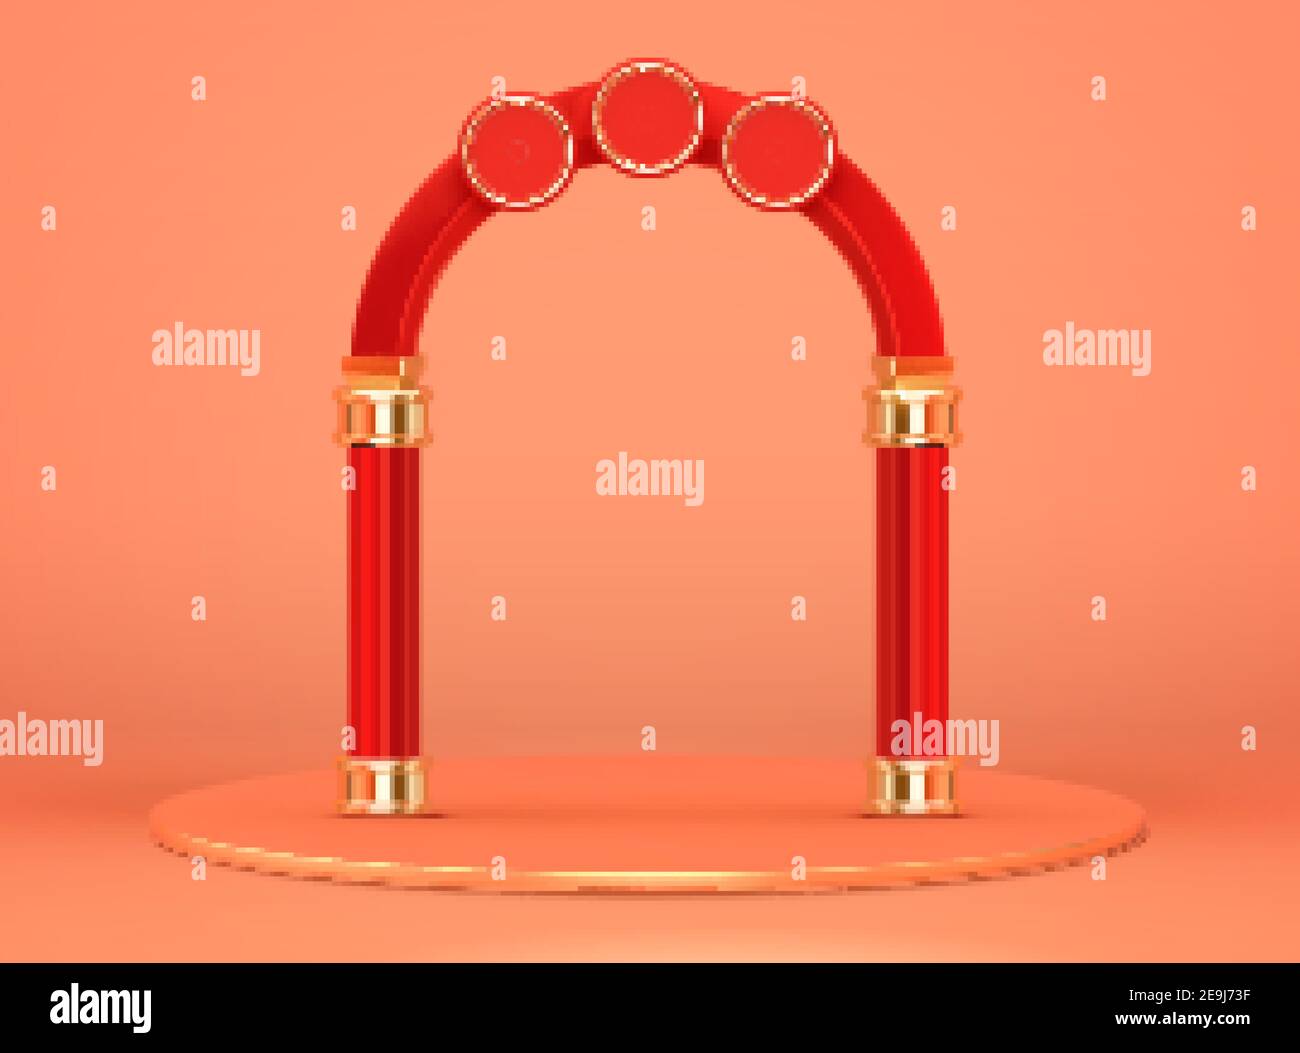 3d red arch with round base isolated on orange background. Suitable for Chinese new year event promo. Stock Vector